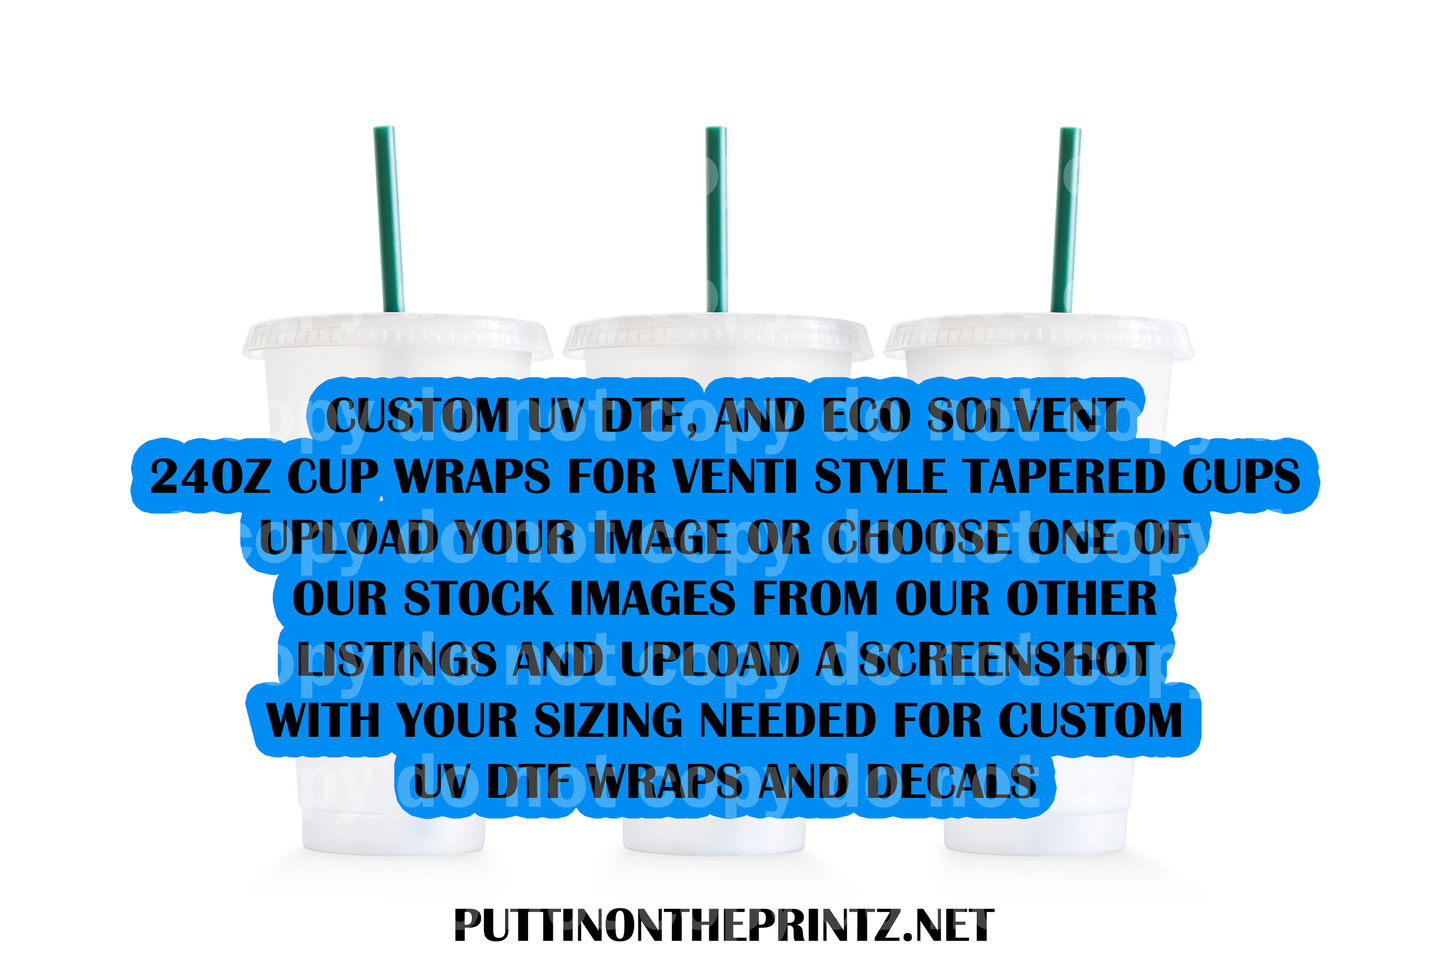 Custom 24oz Cup Wrap - upload your image or choose one of our stock designs